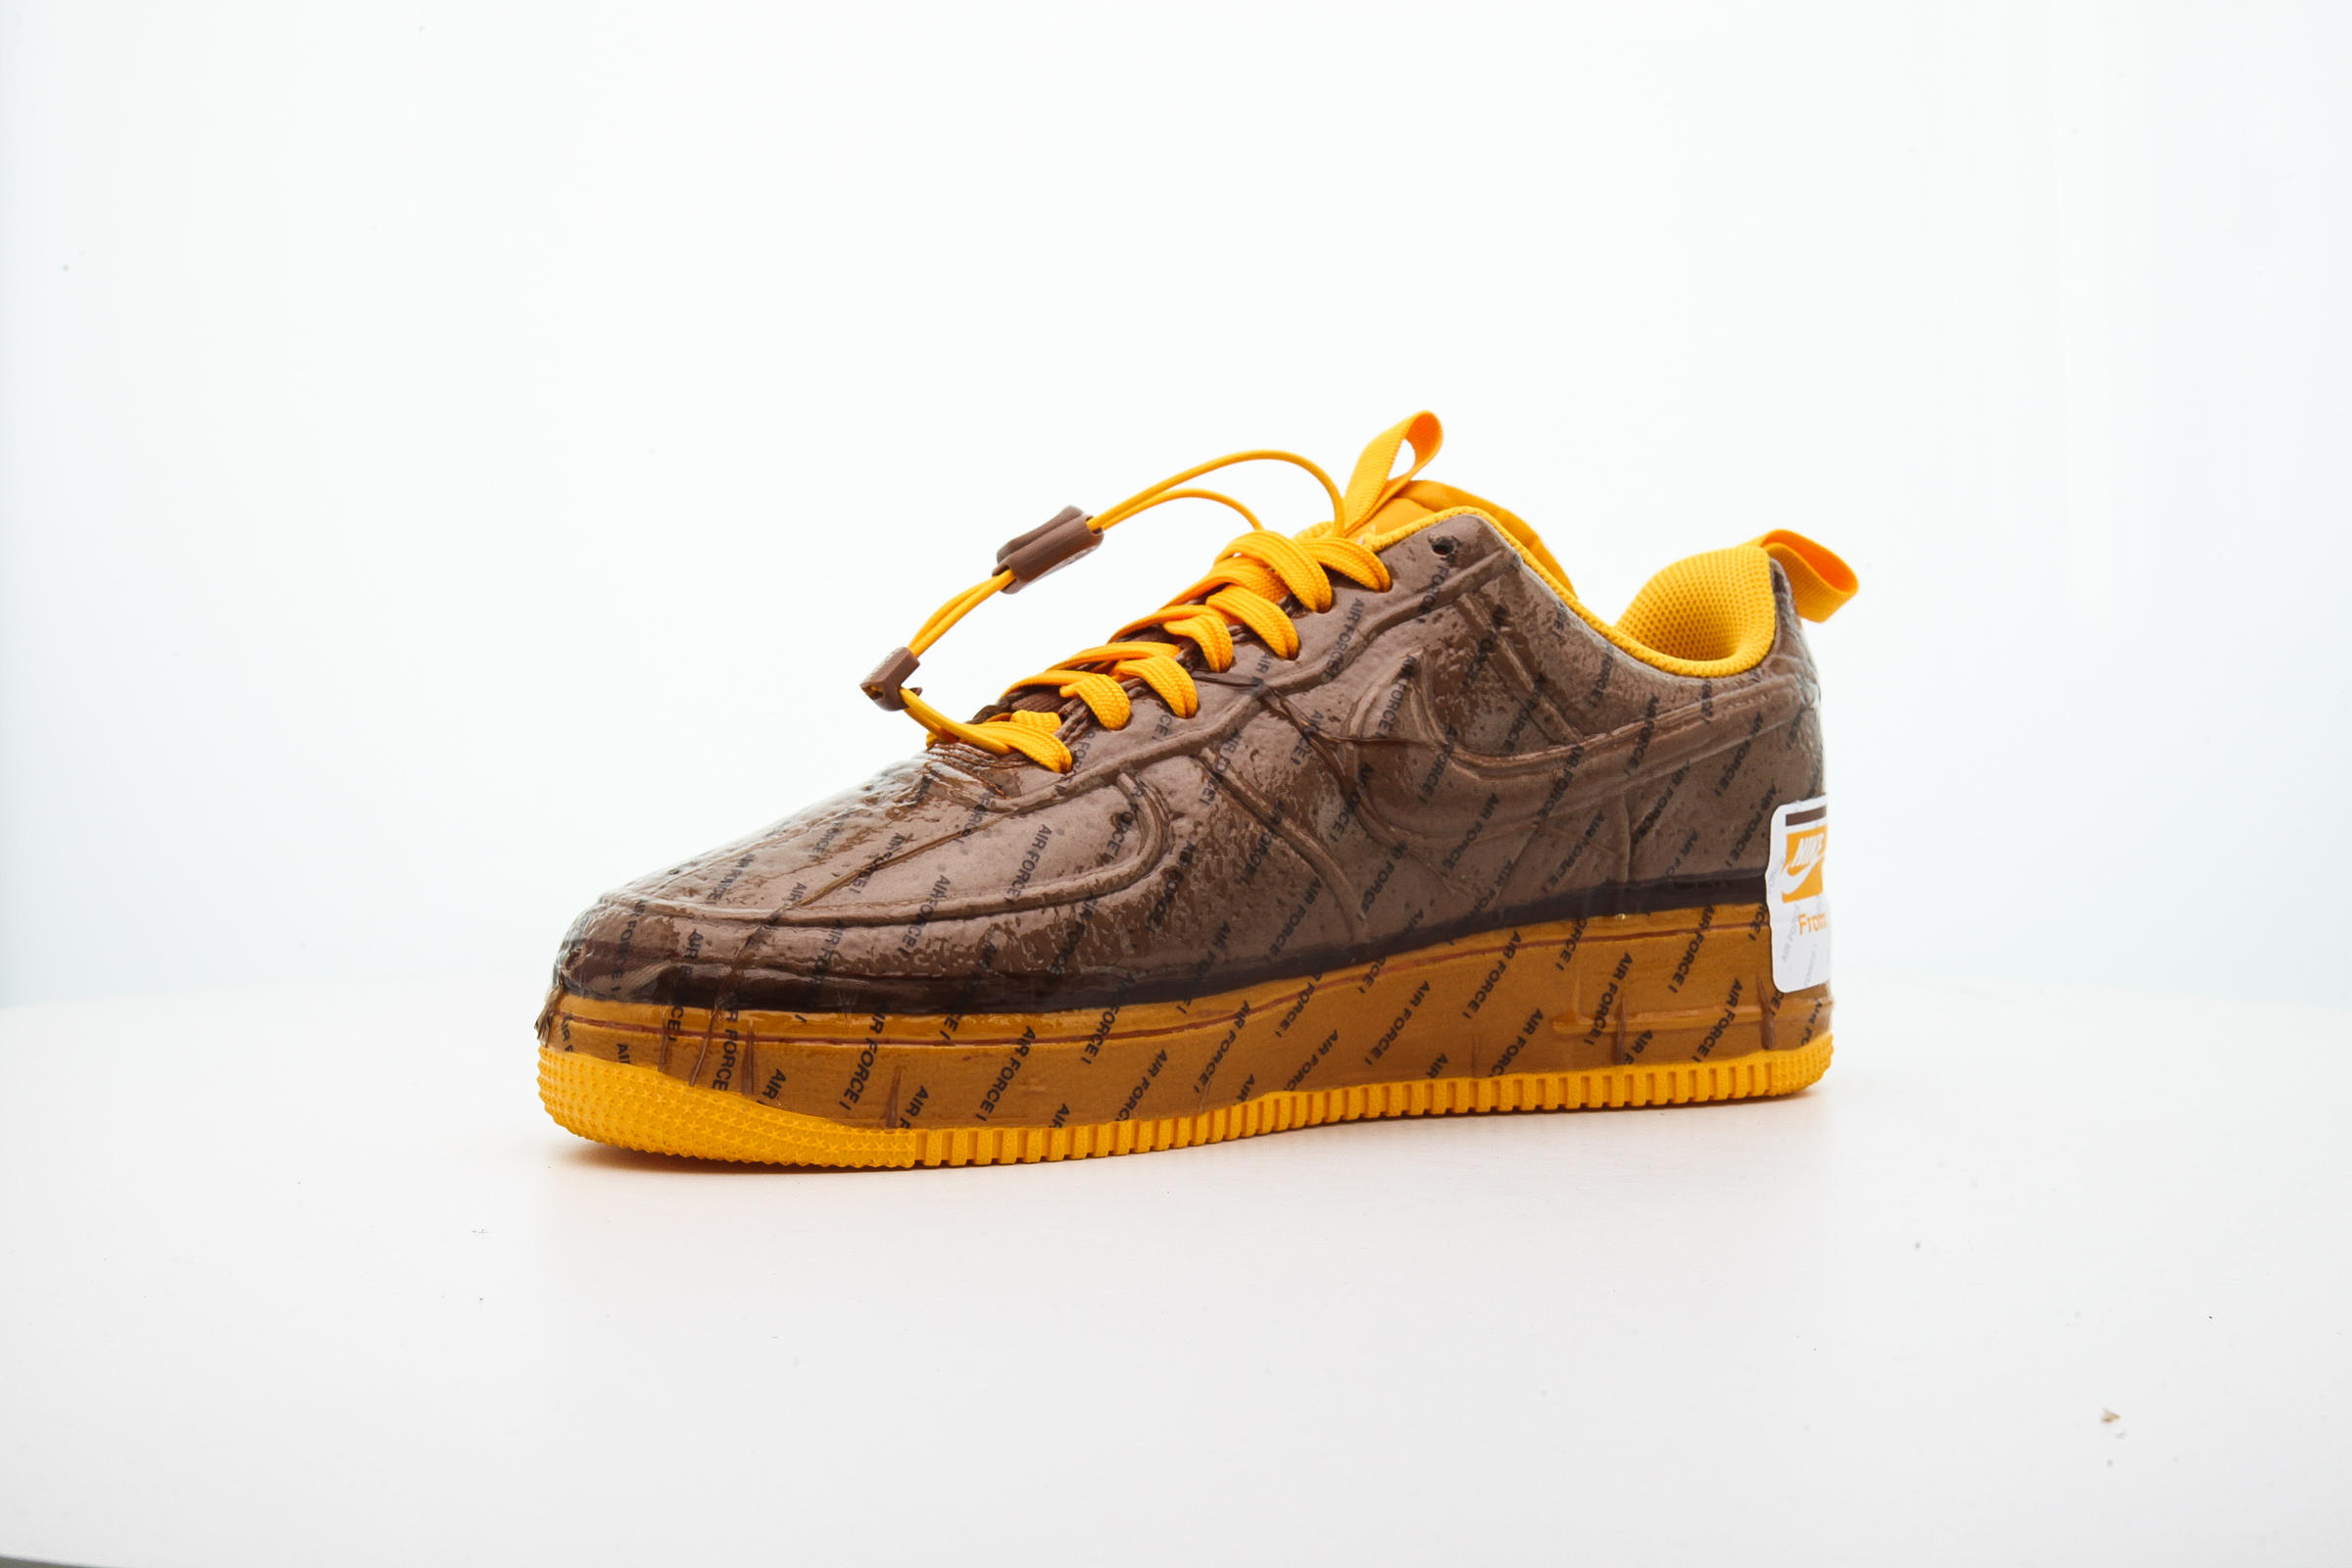 Nike AIR FORCE 1 EXPERIMENTAL "ARCHAEO BROWN"